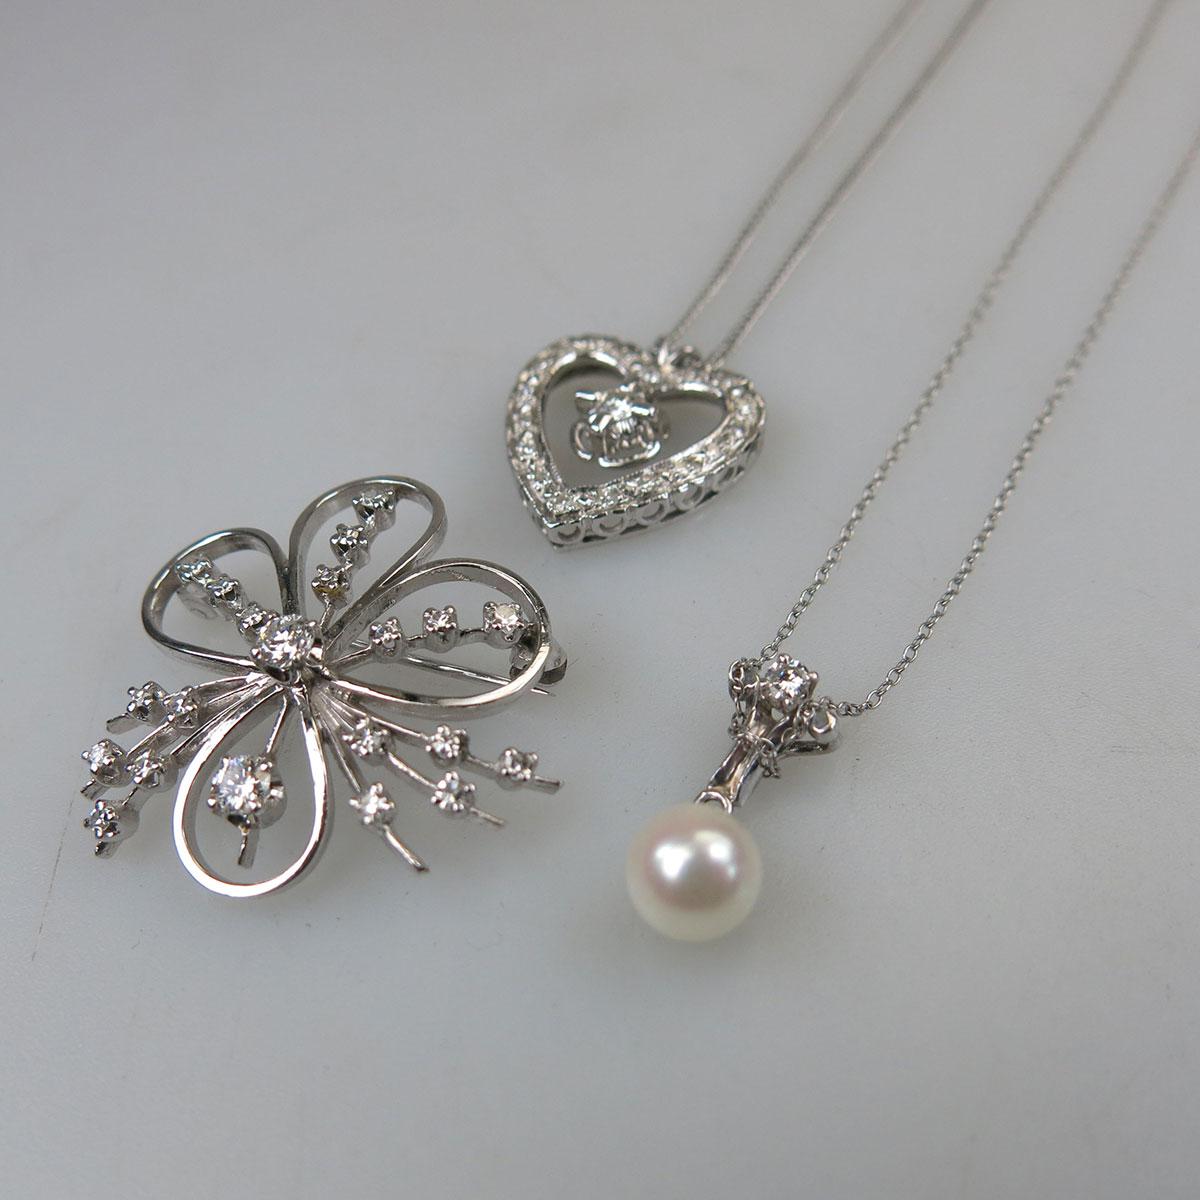 14k White Gold Chain, Pendant And Brooch